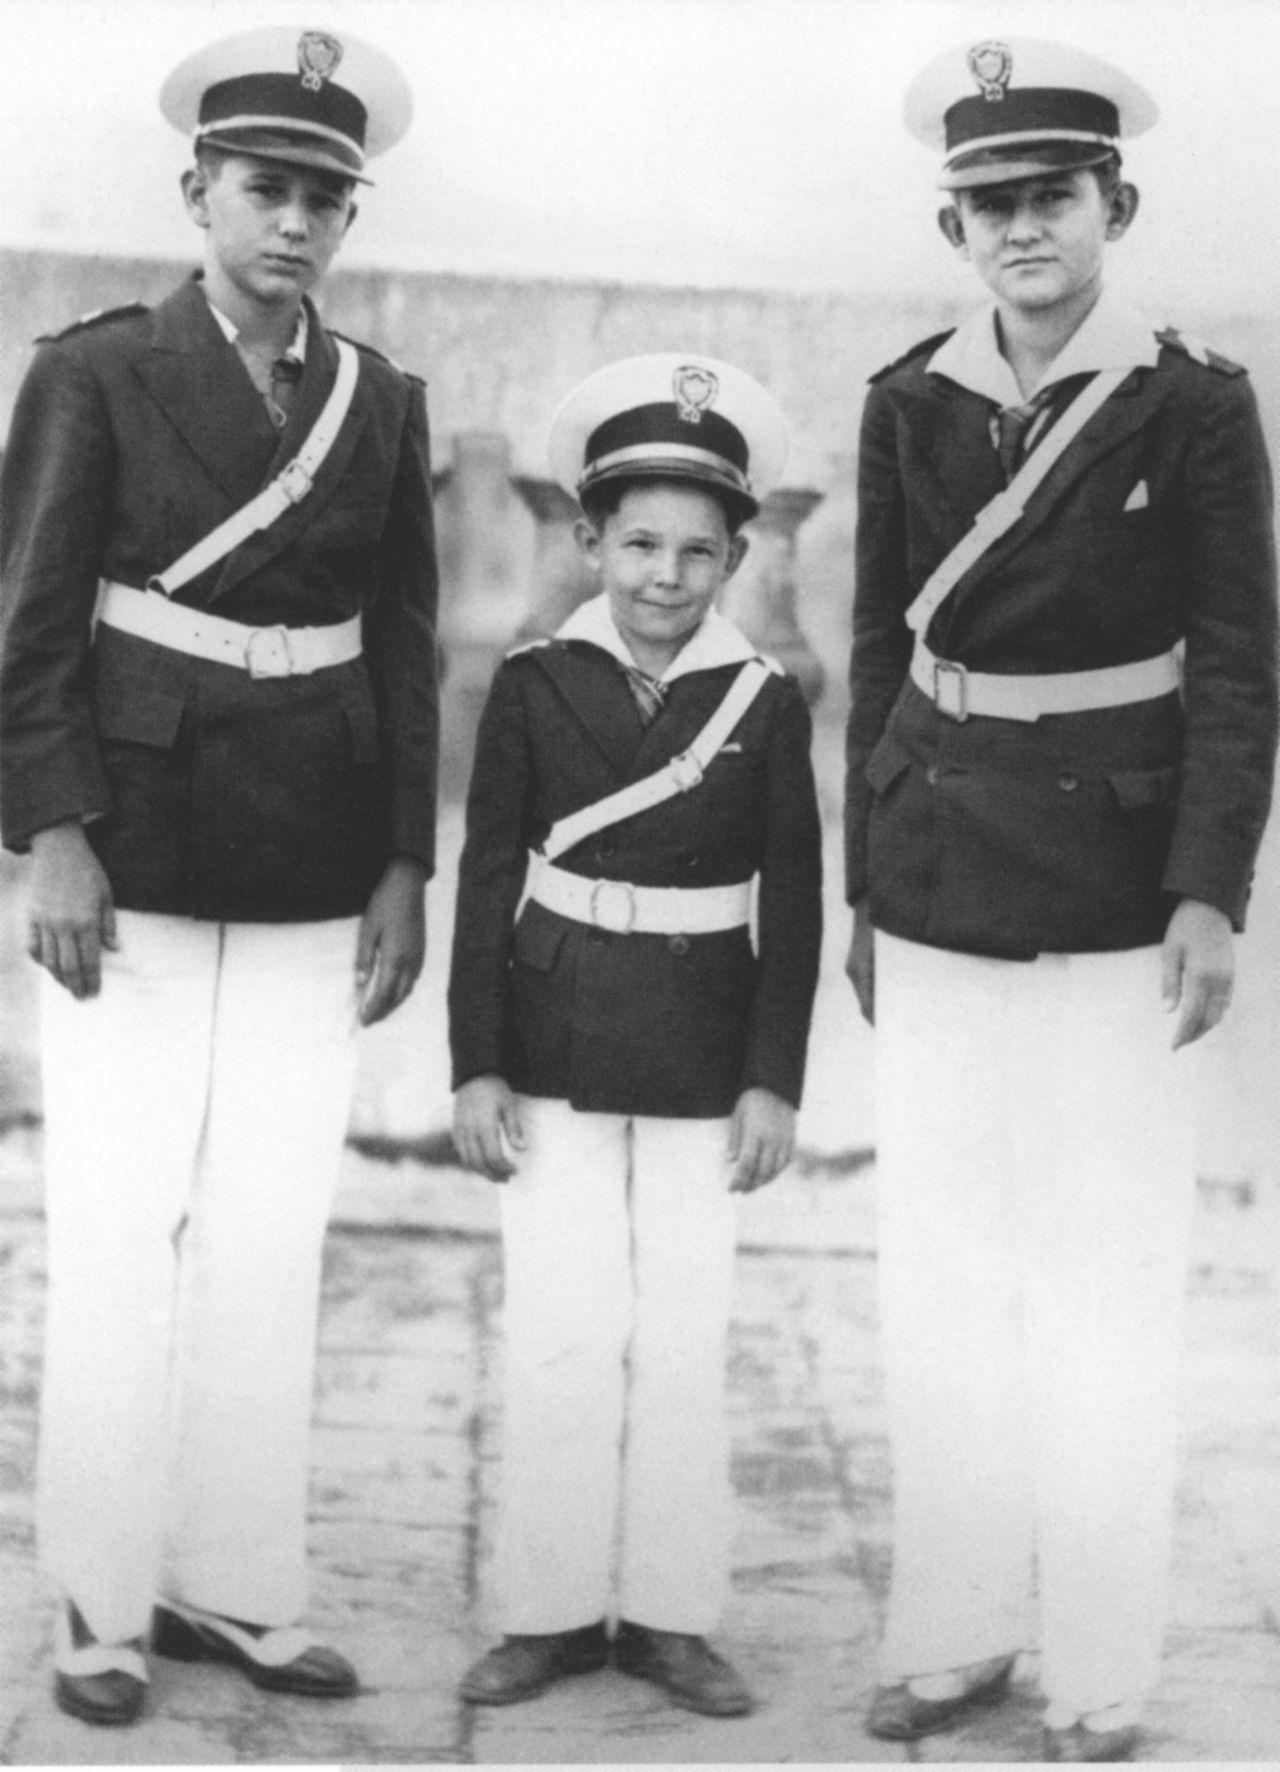 Castro, center, poses for a photo with his brothers Fidel, left, and Ramon, right, in Santiago de Cuba around 1940.